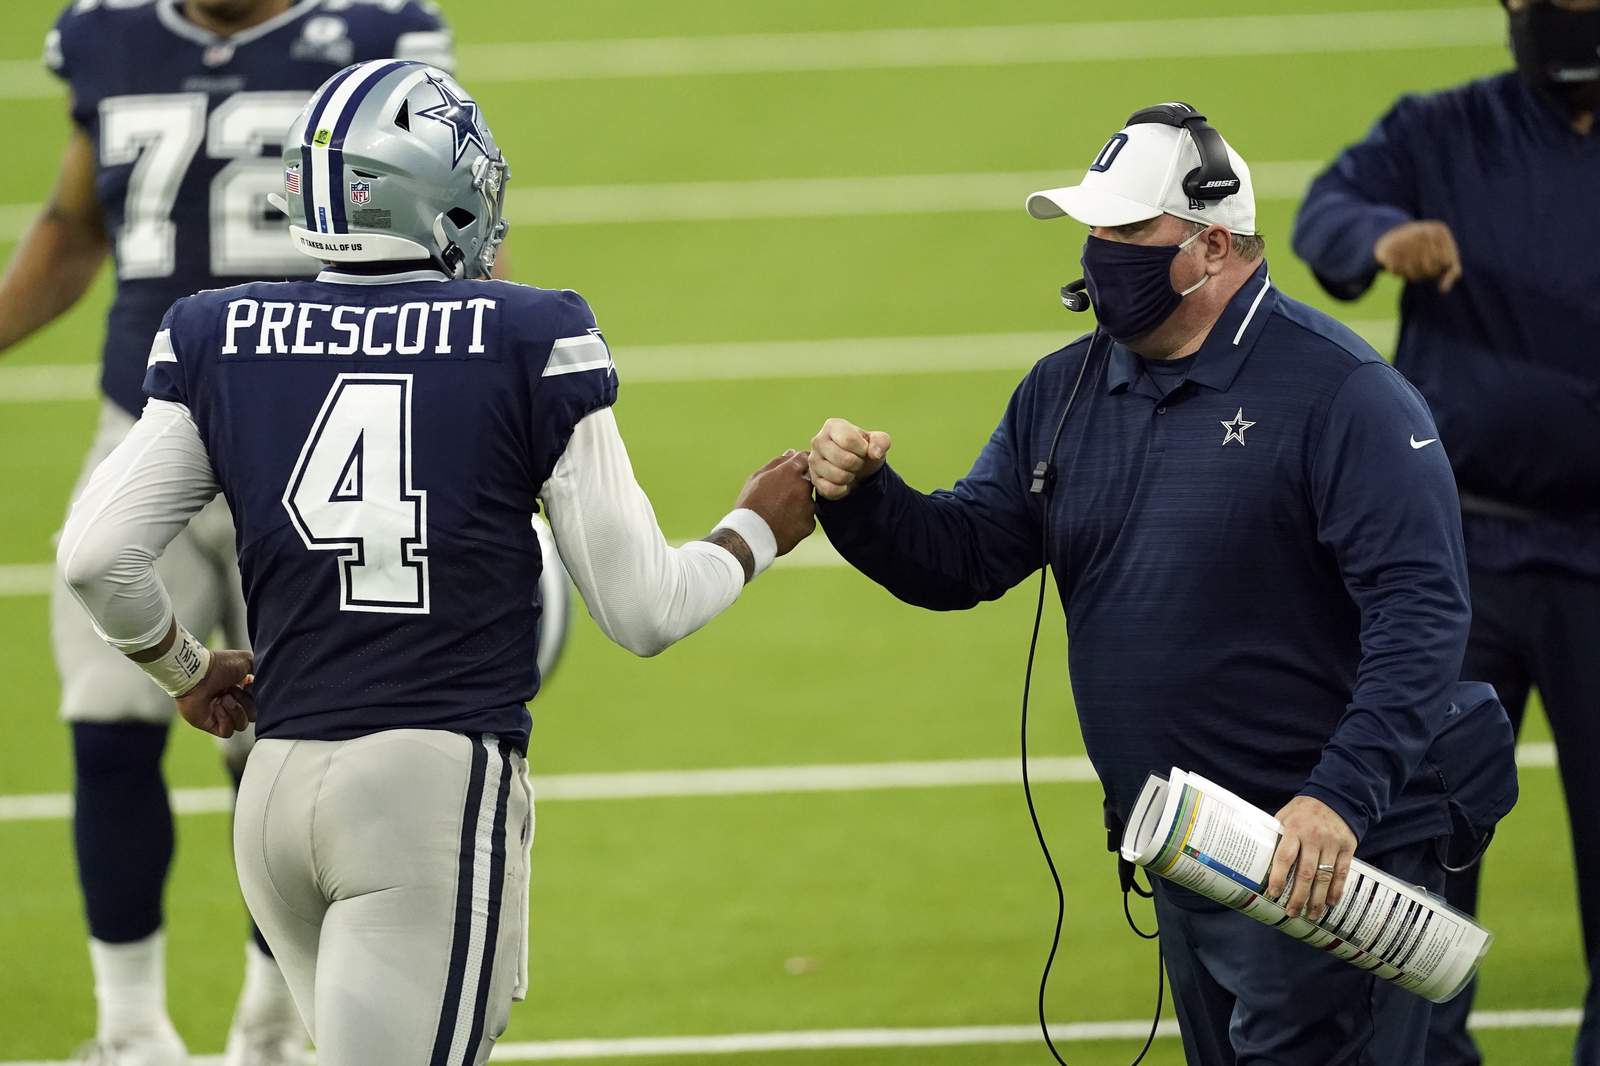 McCarthy’s call on 4th down scrutinized in Cowboys' debut